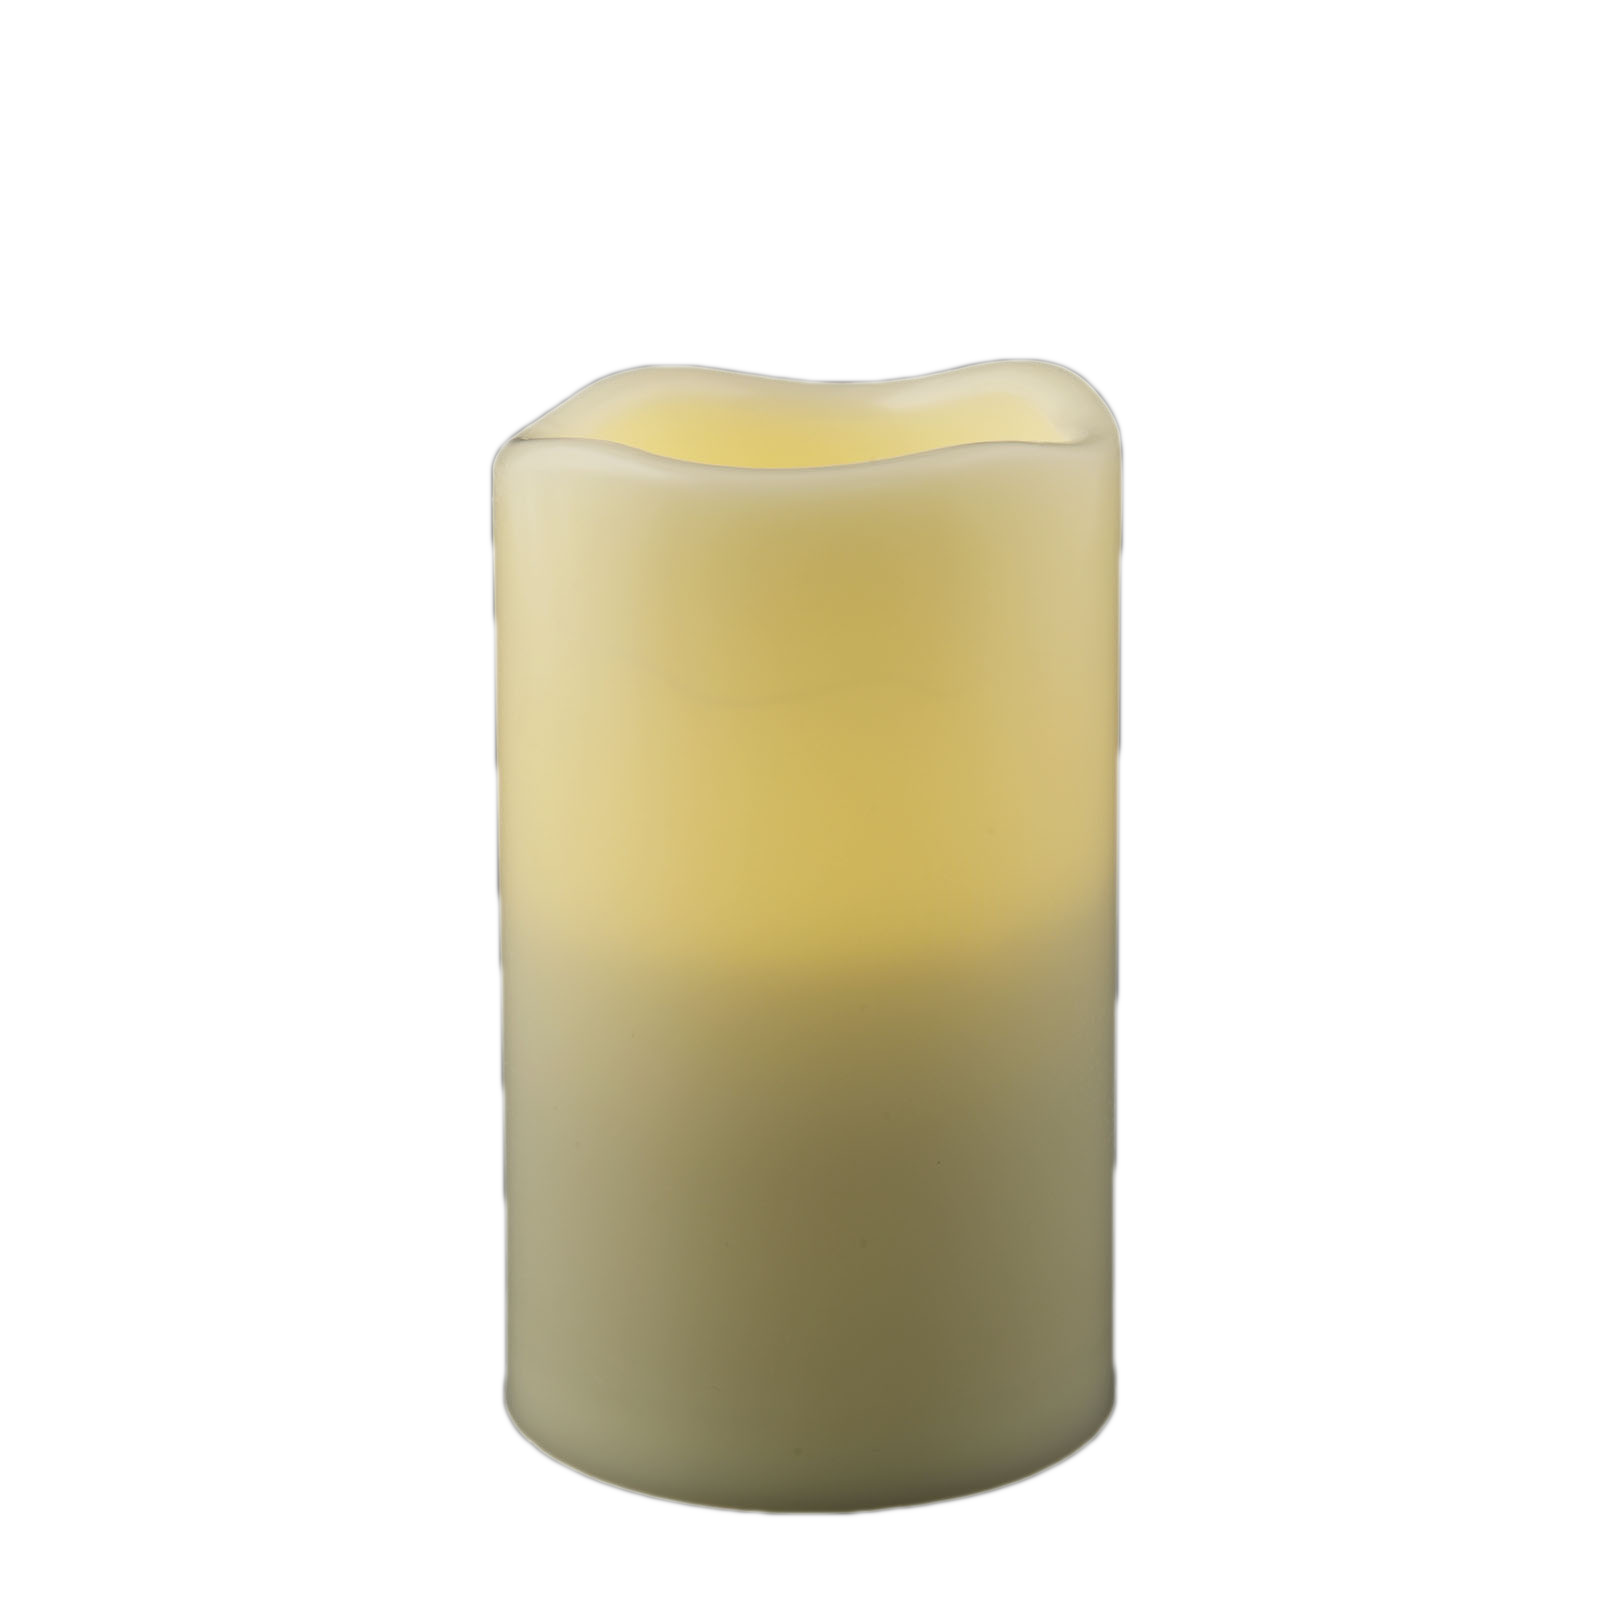 Resin Flameless 3 x 4.75 Pillar Candle With Melted Top